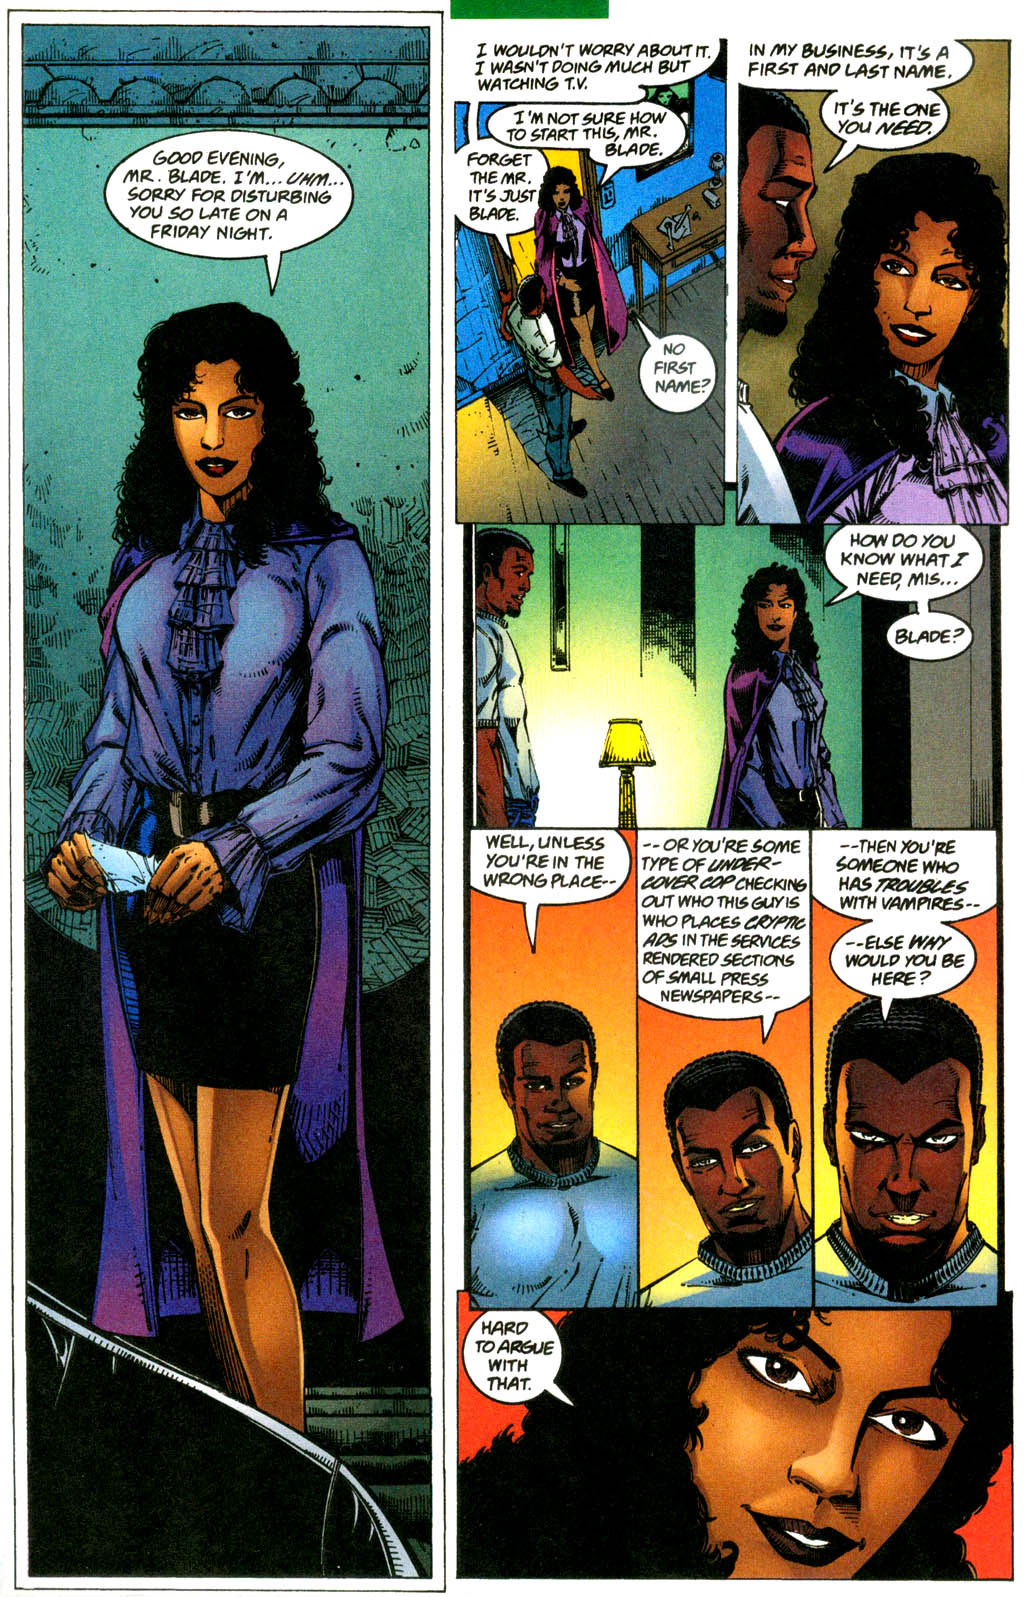 Blade (1998) 1 Page 19